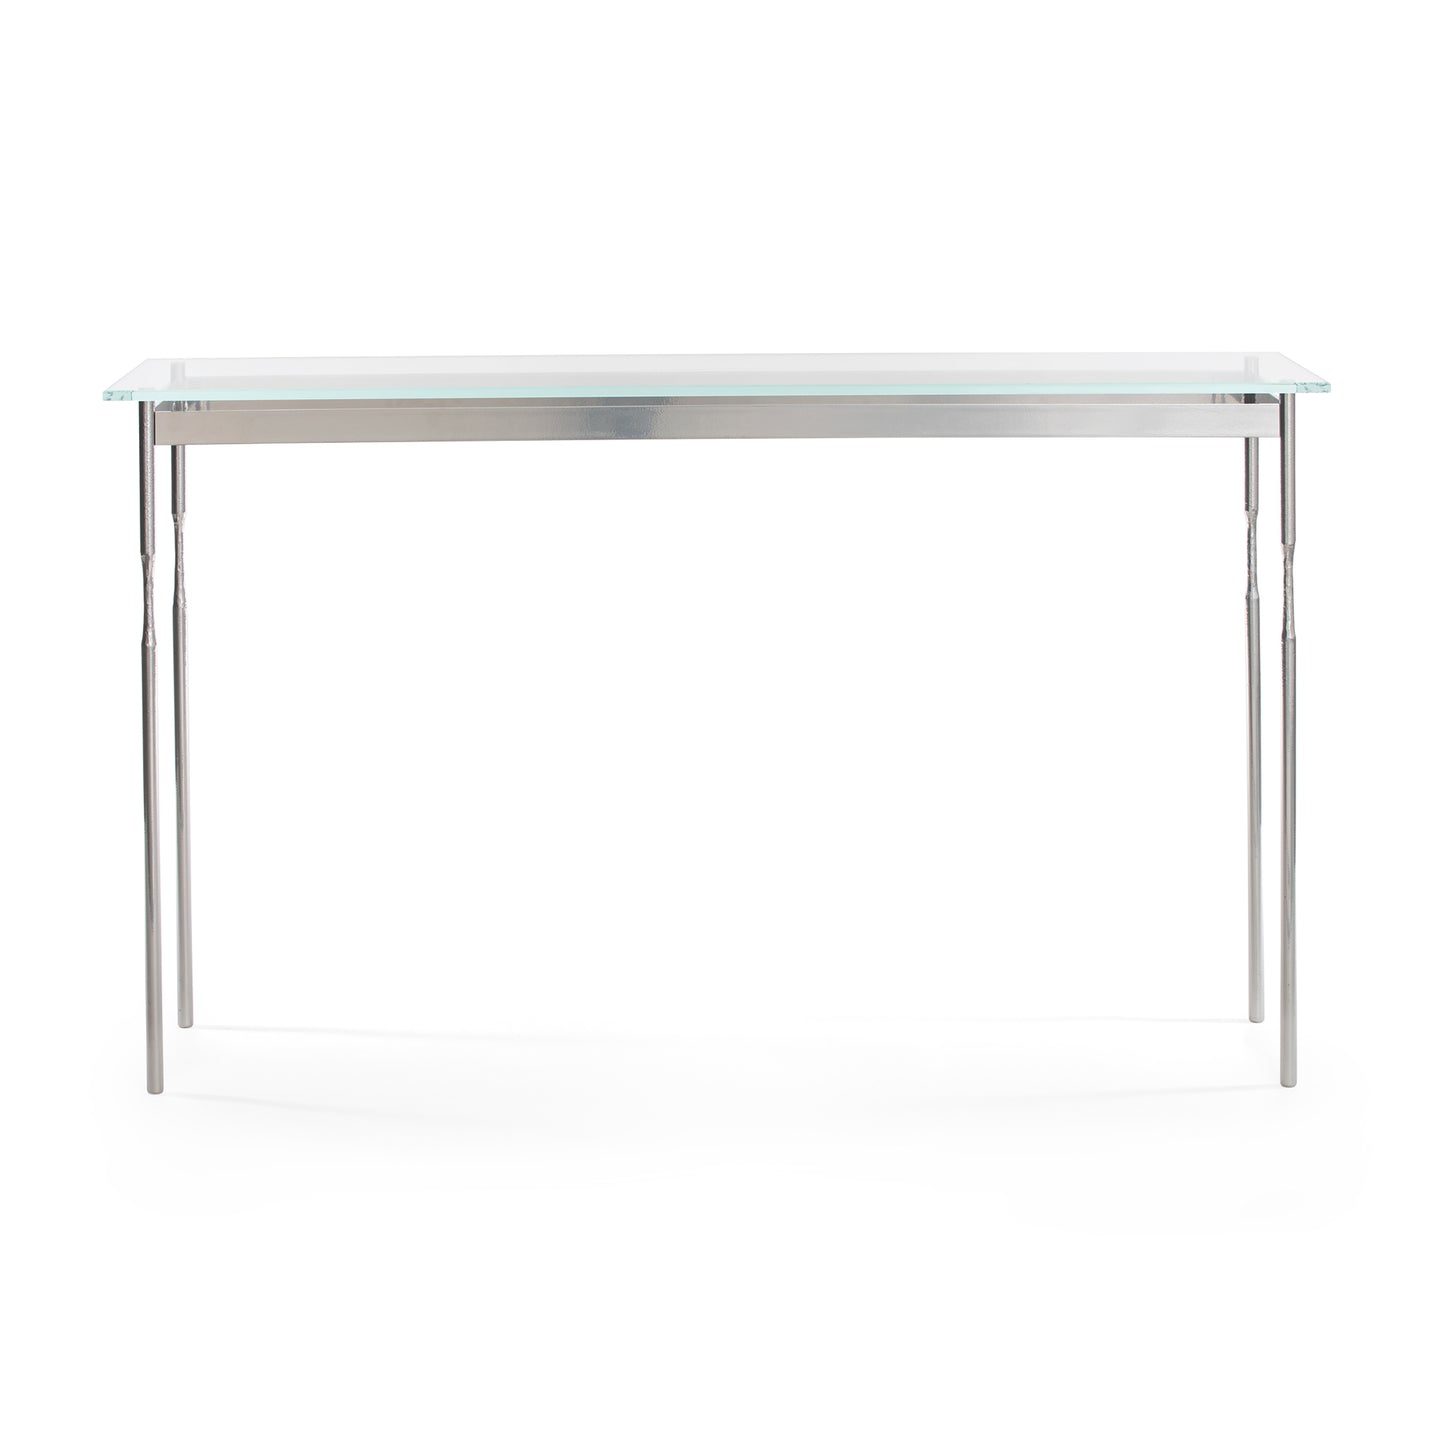 A Hubbardton Forge Senza console table with a tempered glass top and metal legs on a white background.